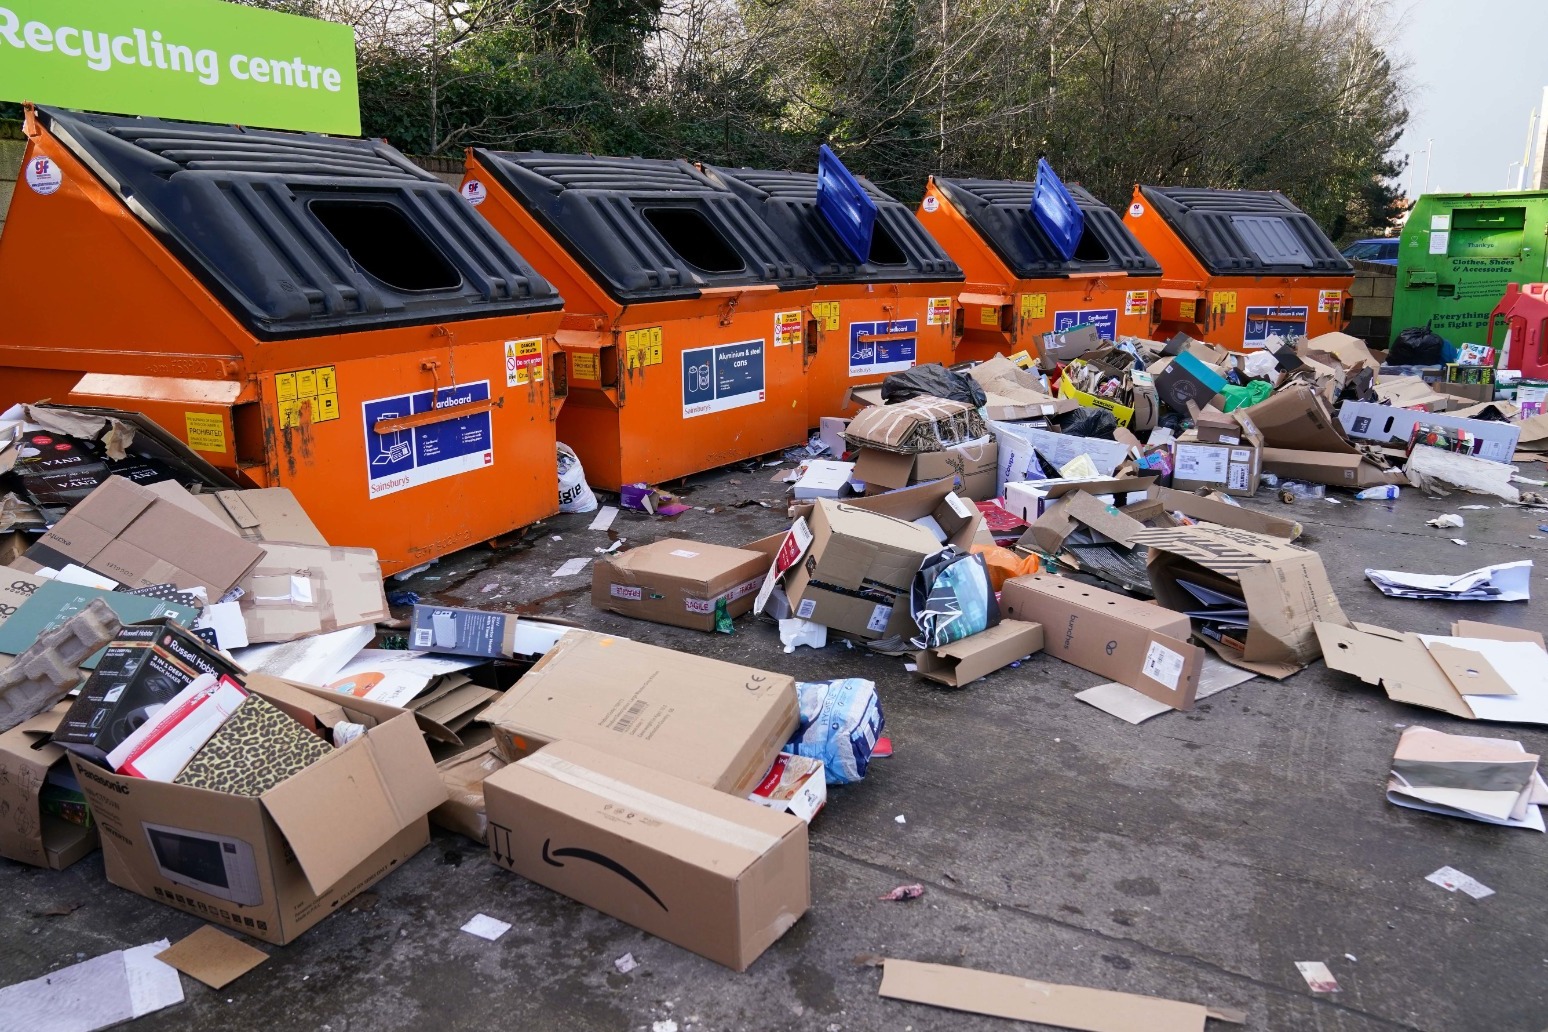 Ban all rubbish exports to crack down on waste crime, Environment Agency urges 